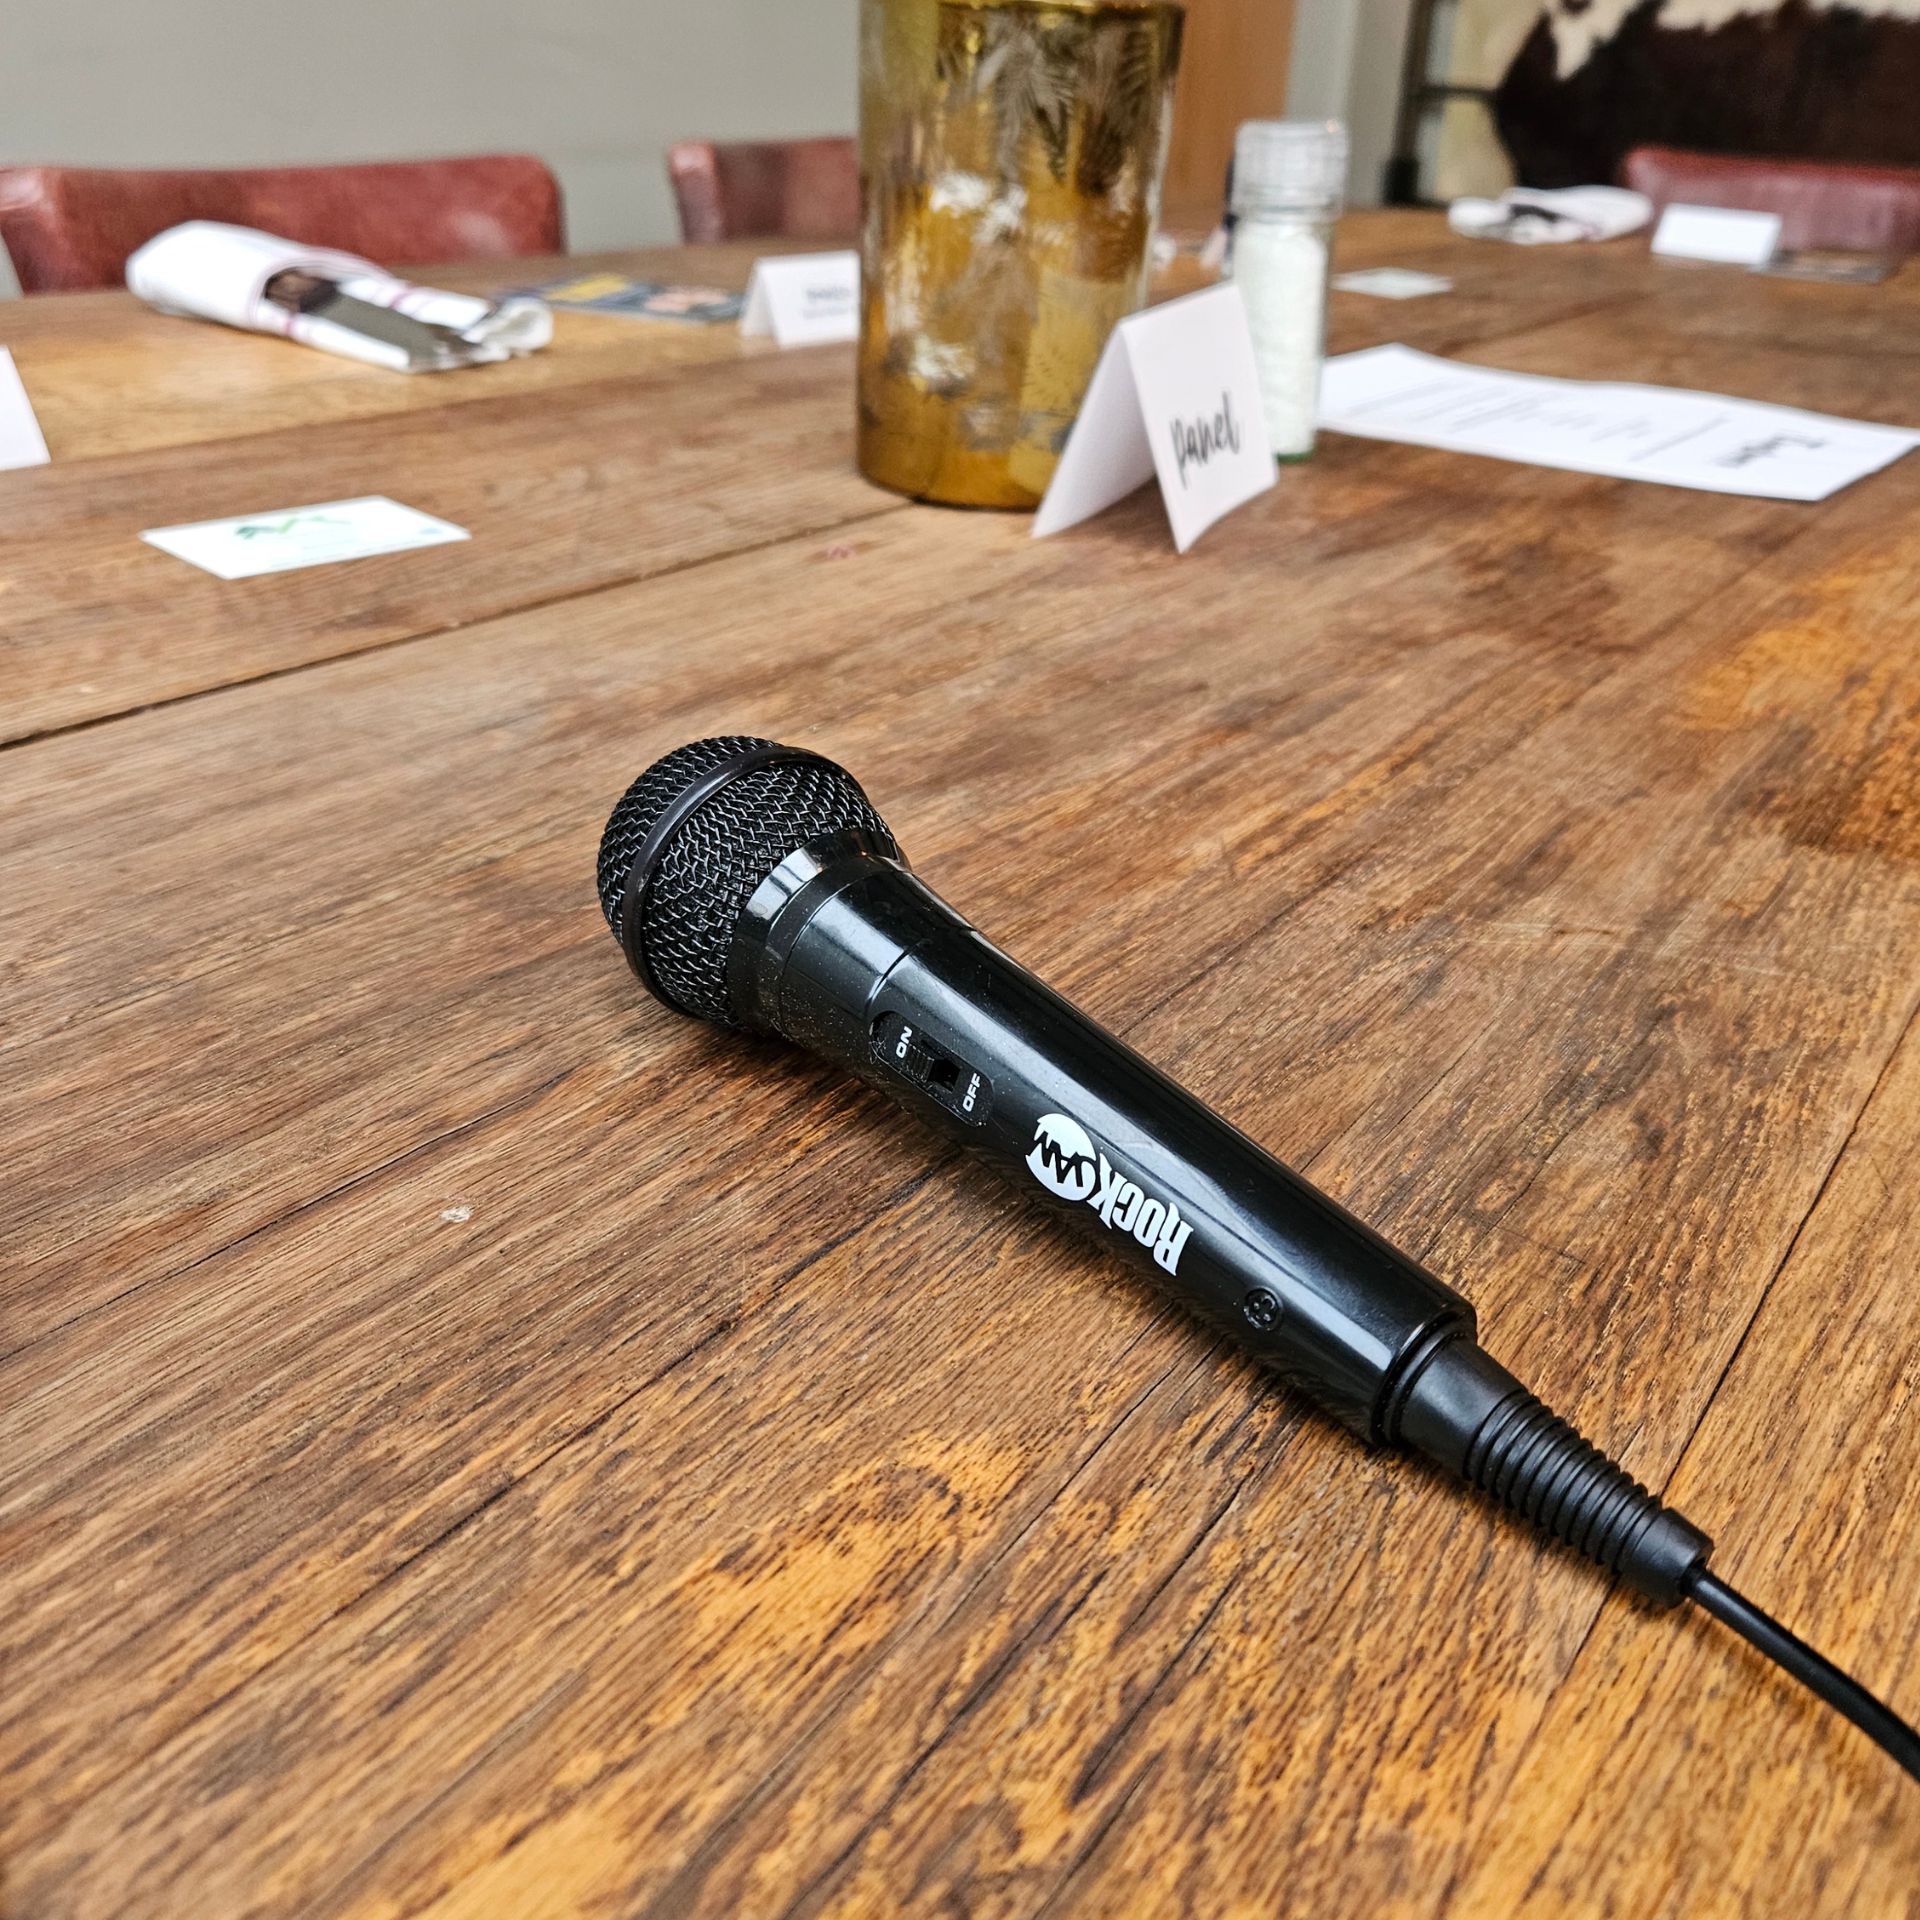 A microphone on a table